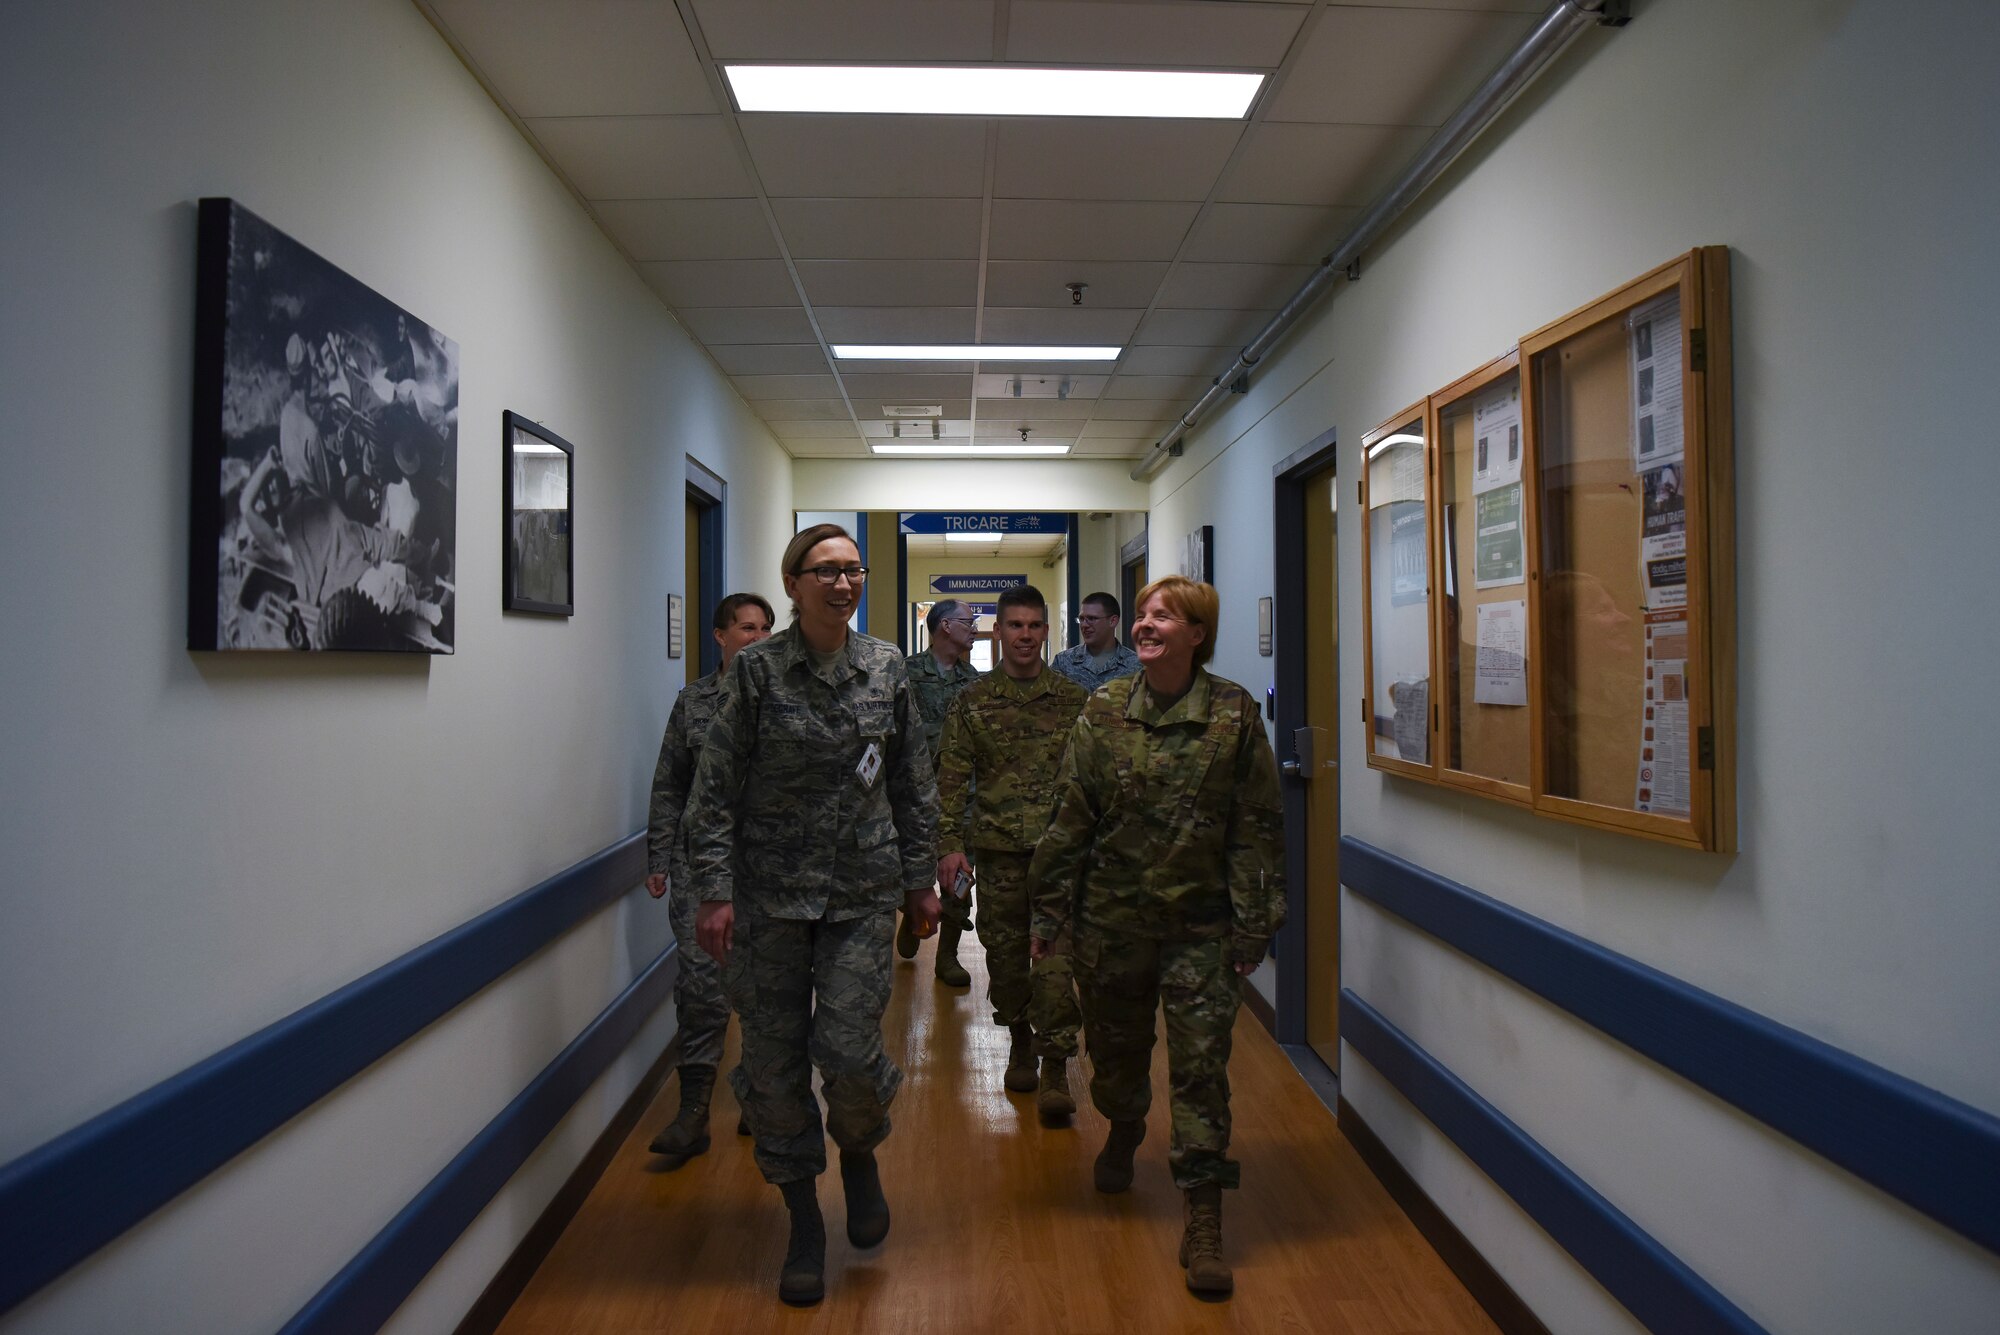 U.S. Air Force Brig. Gen. (Dr.) Sharon Bannister, Defense Health Agency education and training deputy assistant director and Assistant Surgeon General for Dental Services, walks with Senior Airman Wendy Updegrave, an 8th Medical Operations Squadron family health technician, during her visit to Kunsan Air Base, Republic of Korea, Jan. 23, 2019. Gen. Bannister toured the 8th MDG sharing her priorities and learning how the Wolf Pack ensures force readiness. (U.S. Air Force Photo by Senior Airman Savannah Waters)